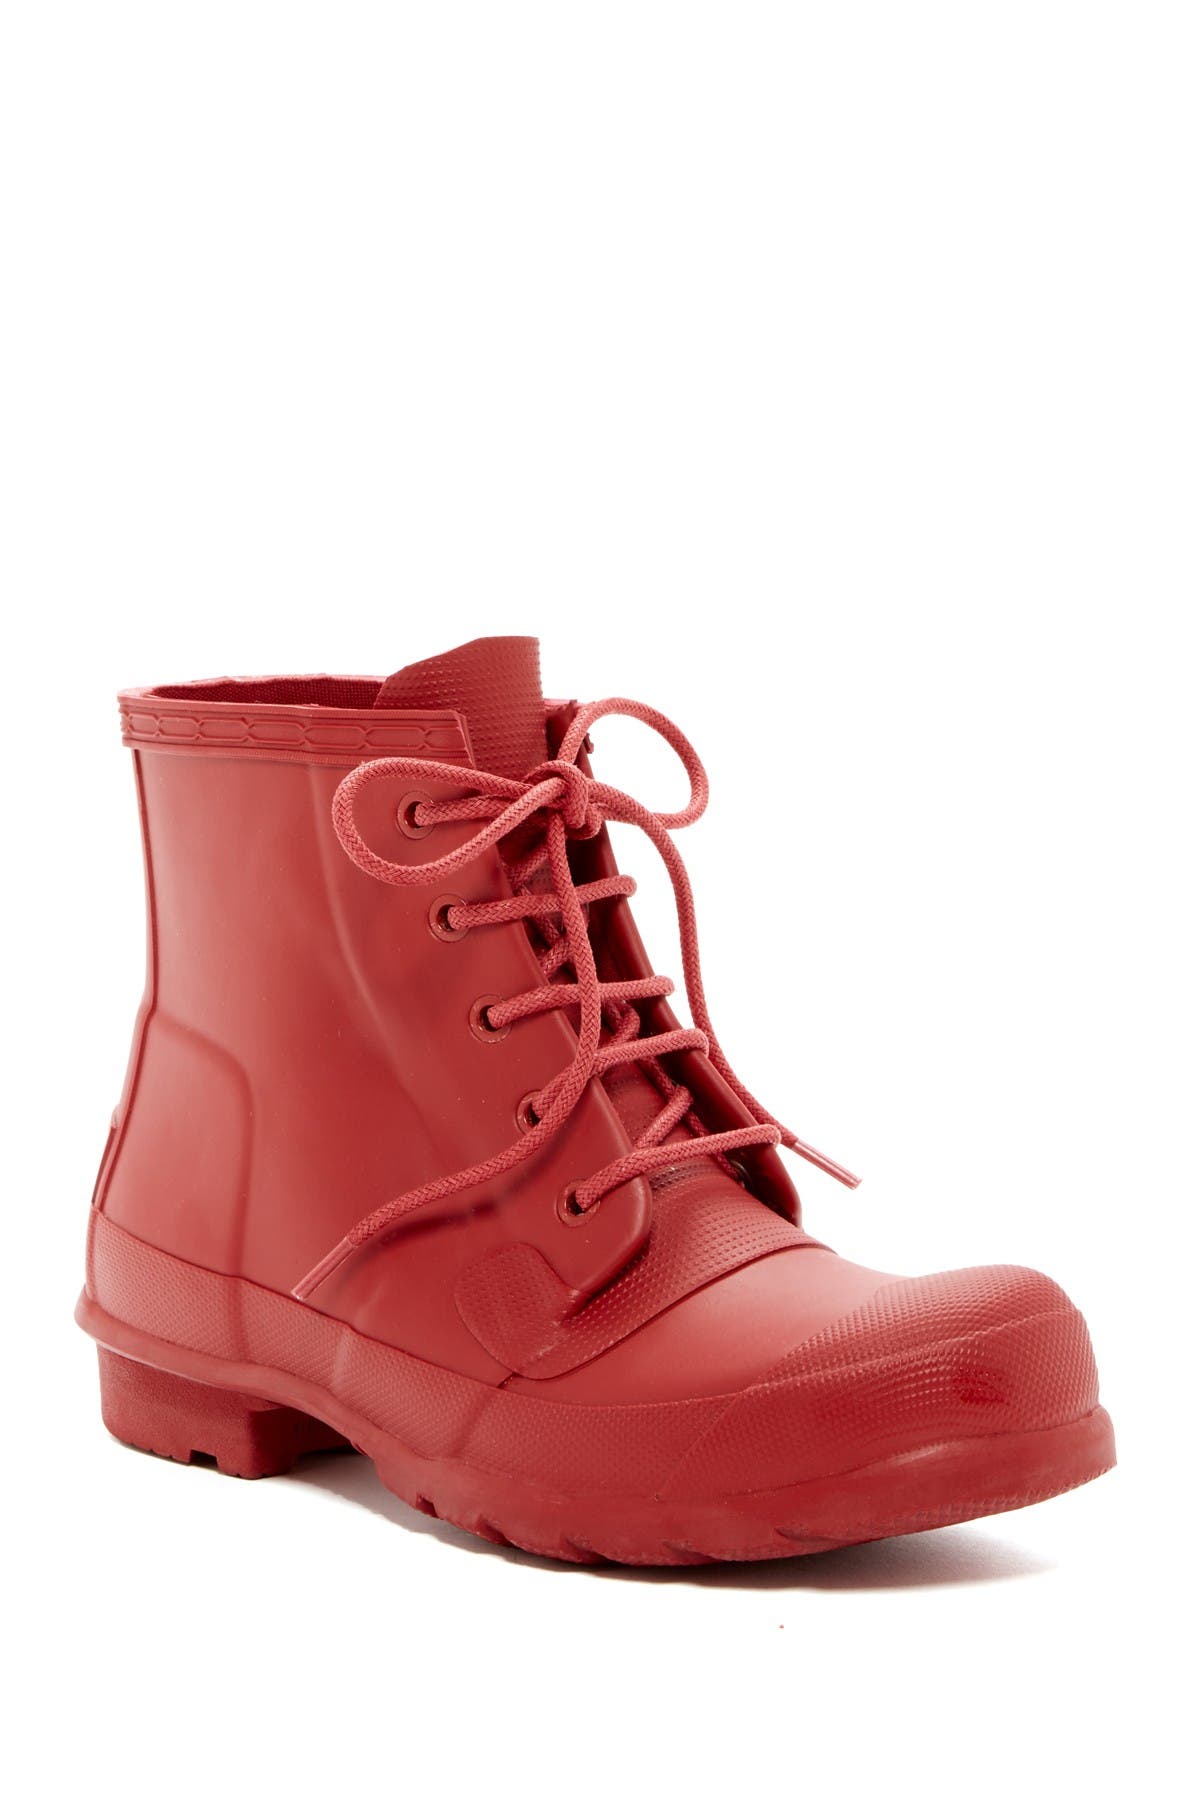 hunter lace up boots